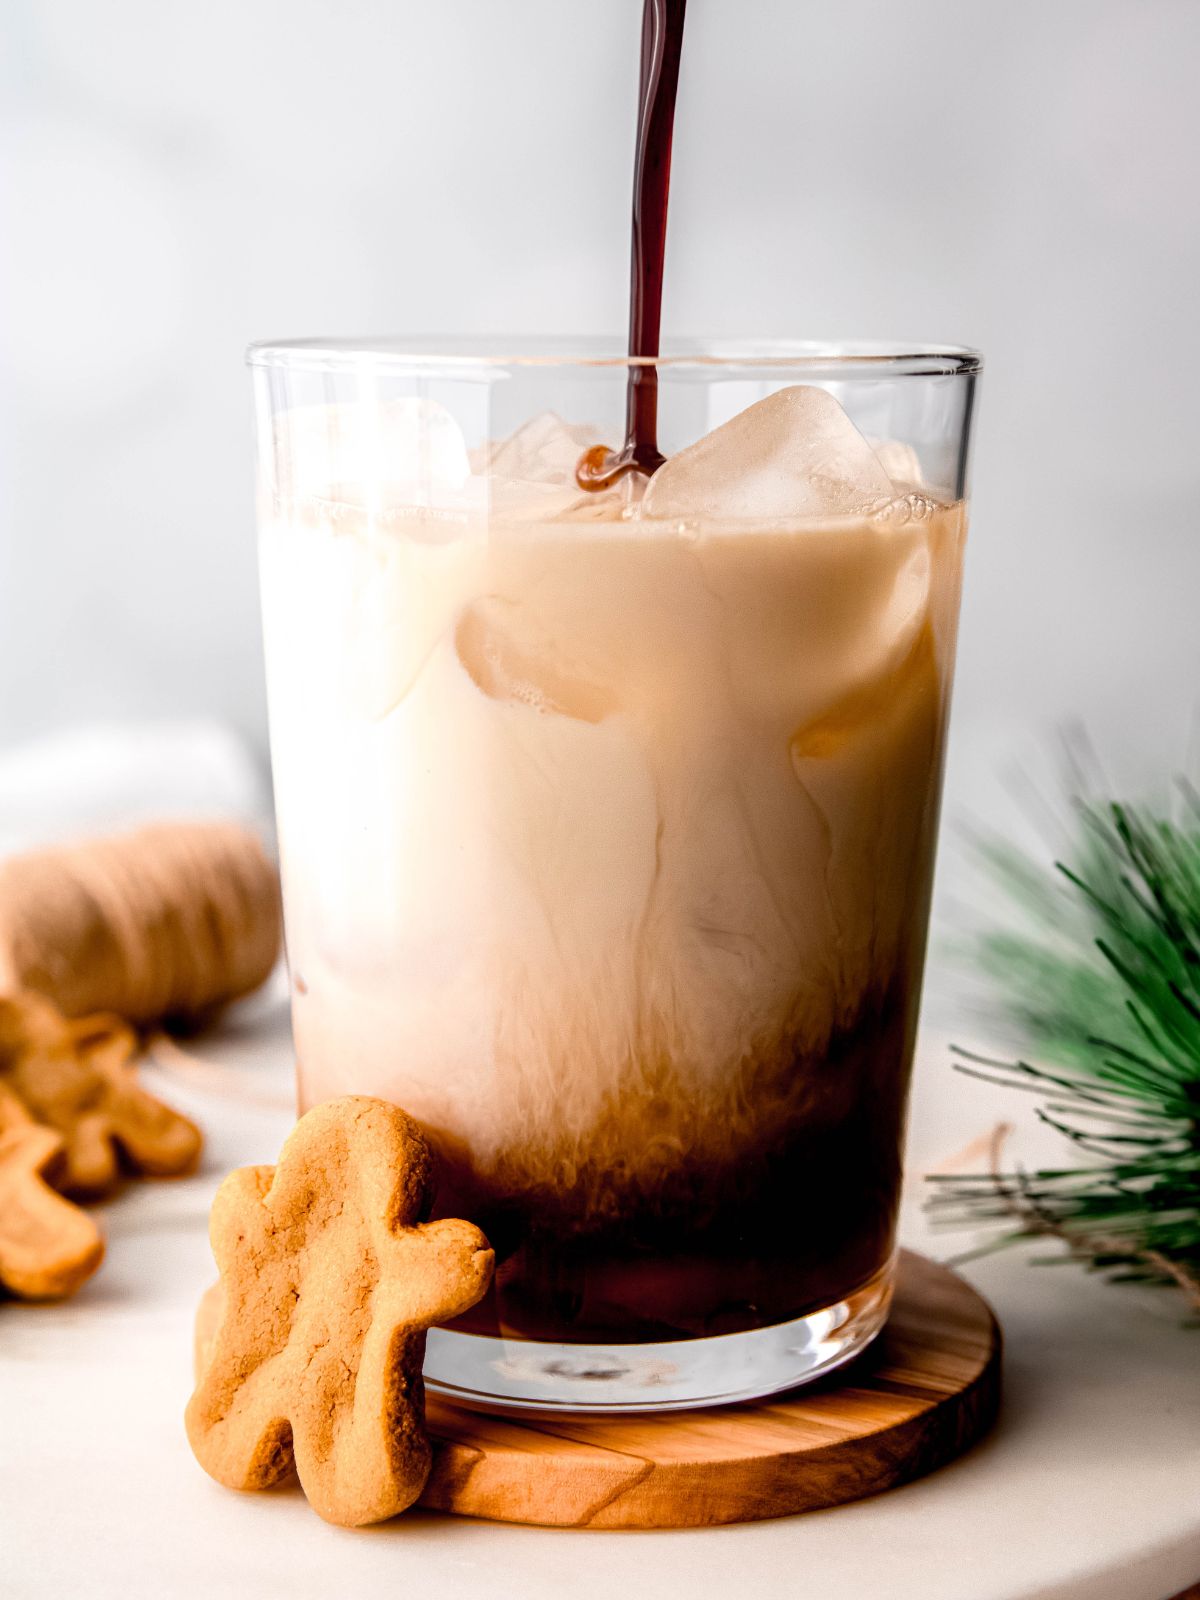 Pouring the gingerbread syrup into a glass with milk and coffee.